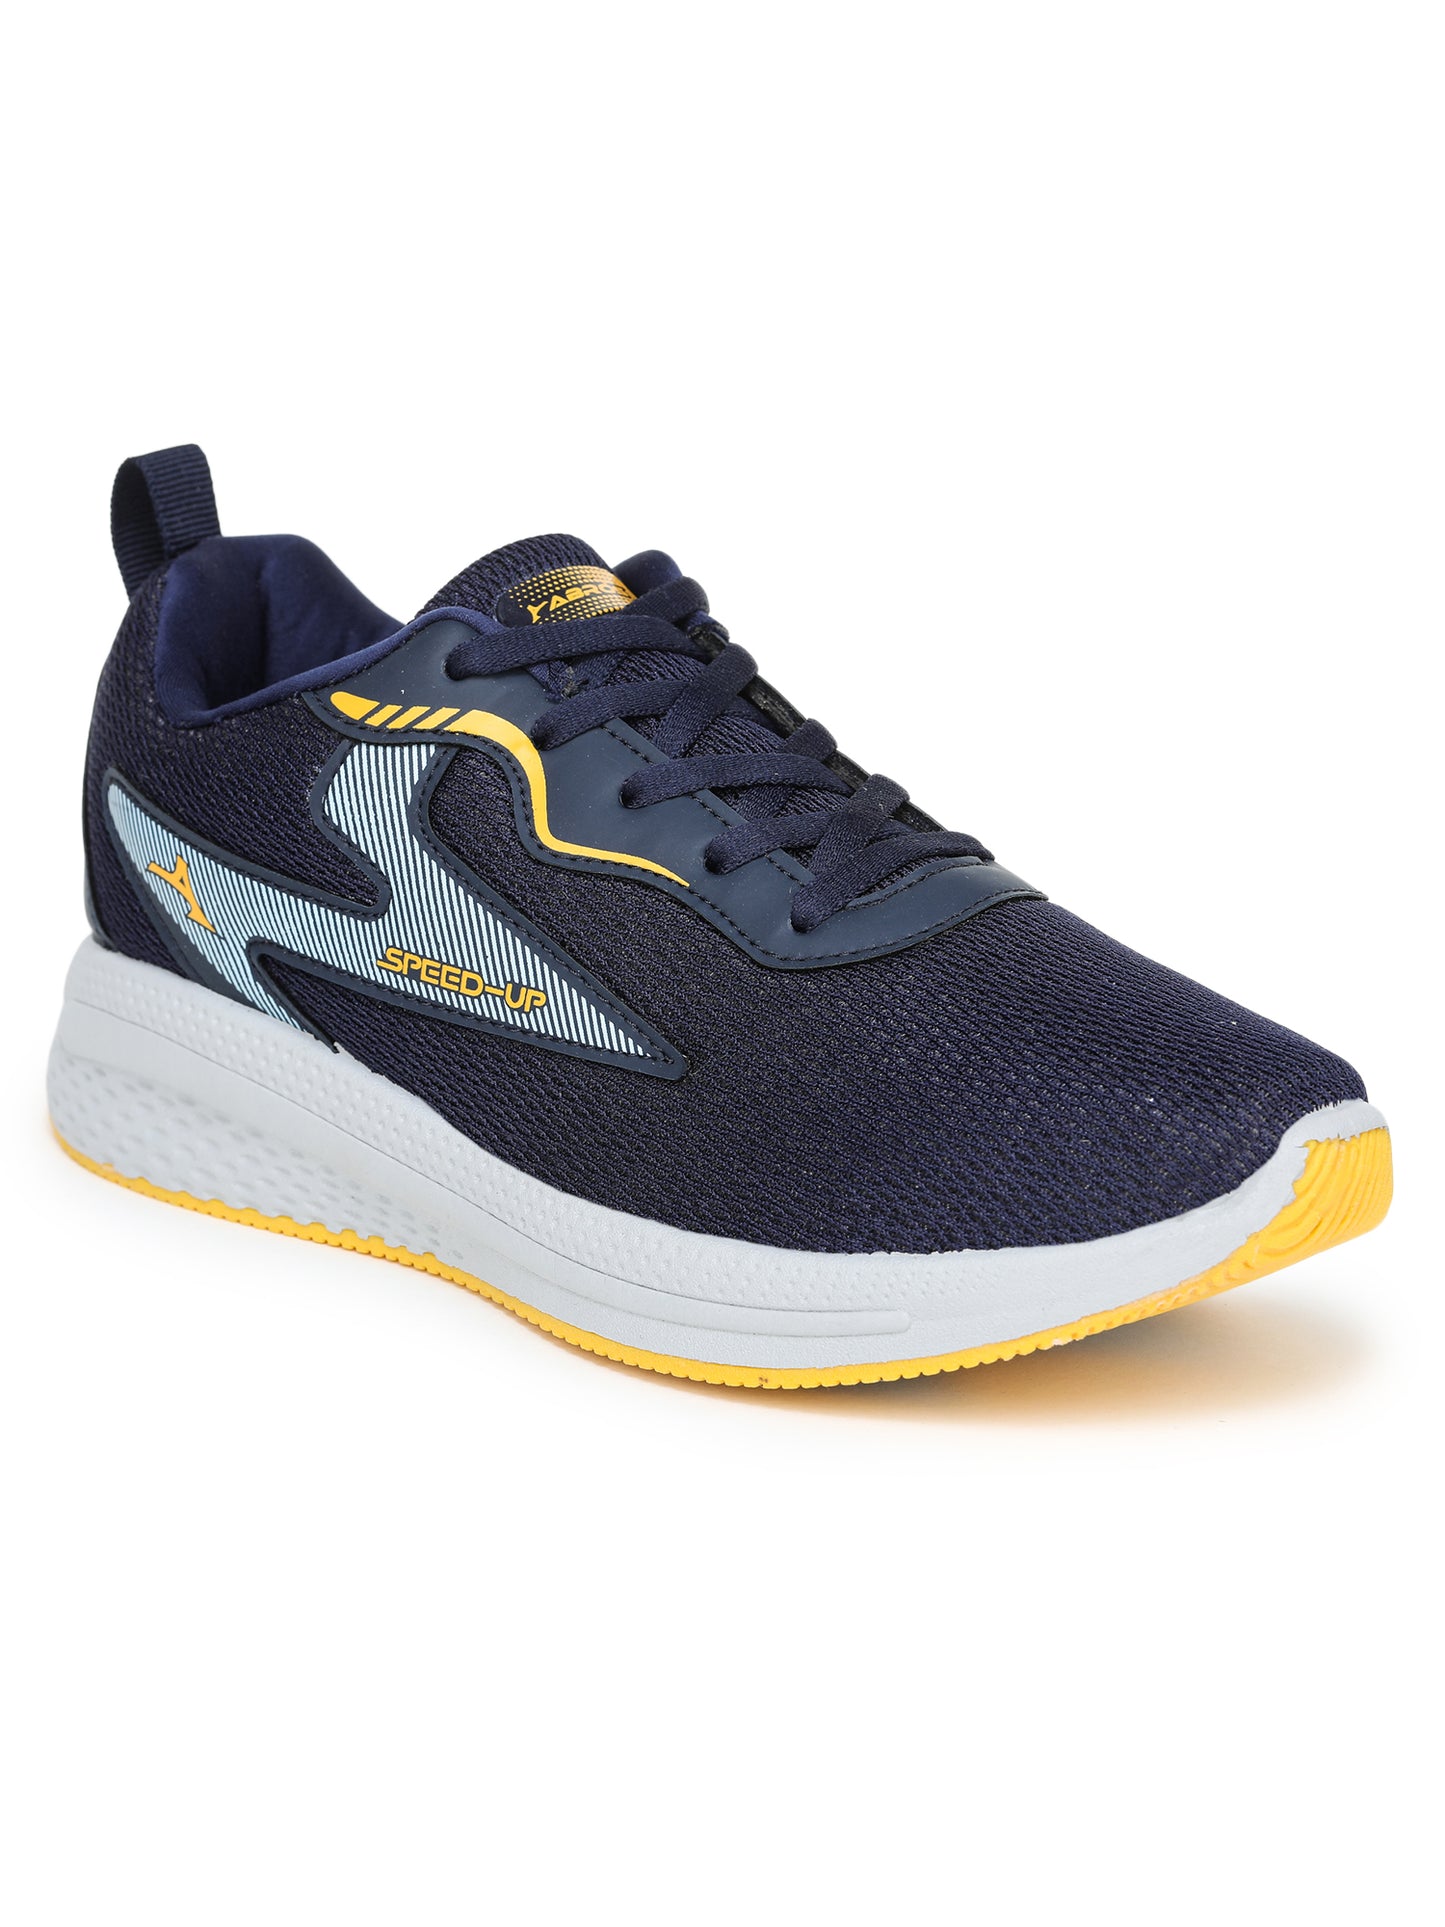 ABROS RAY SPORTS-SHOES FOR MEN